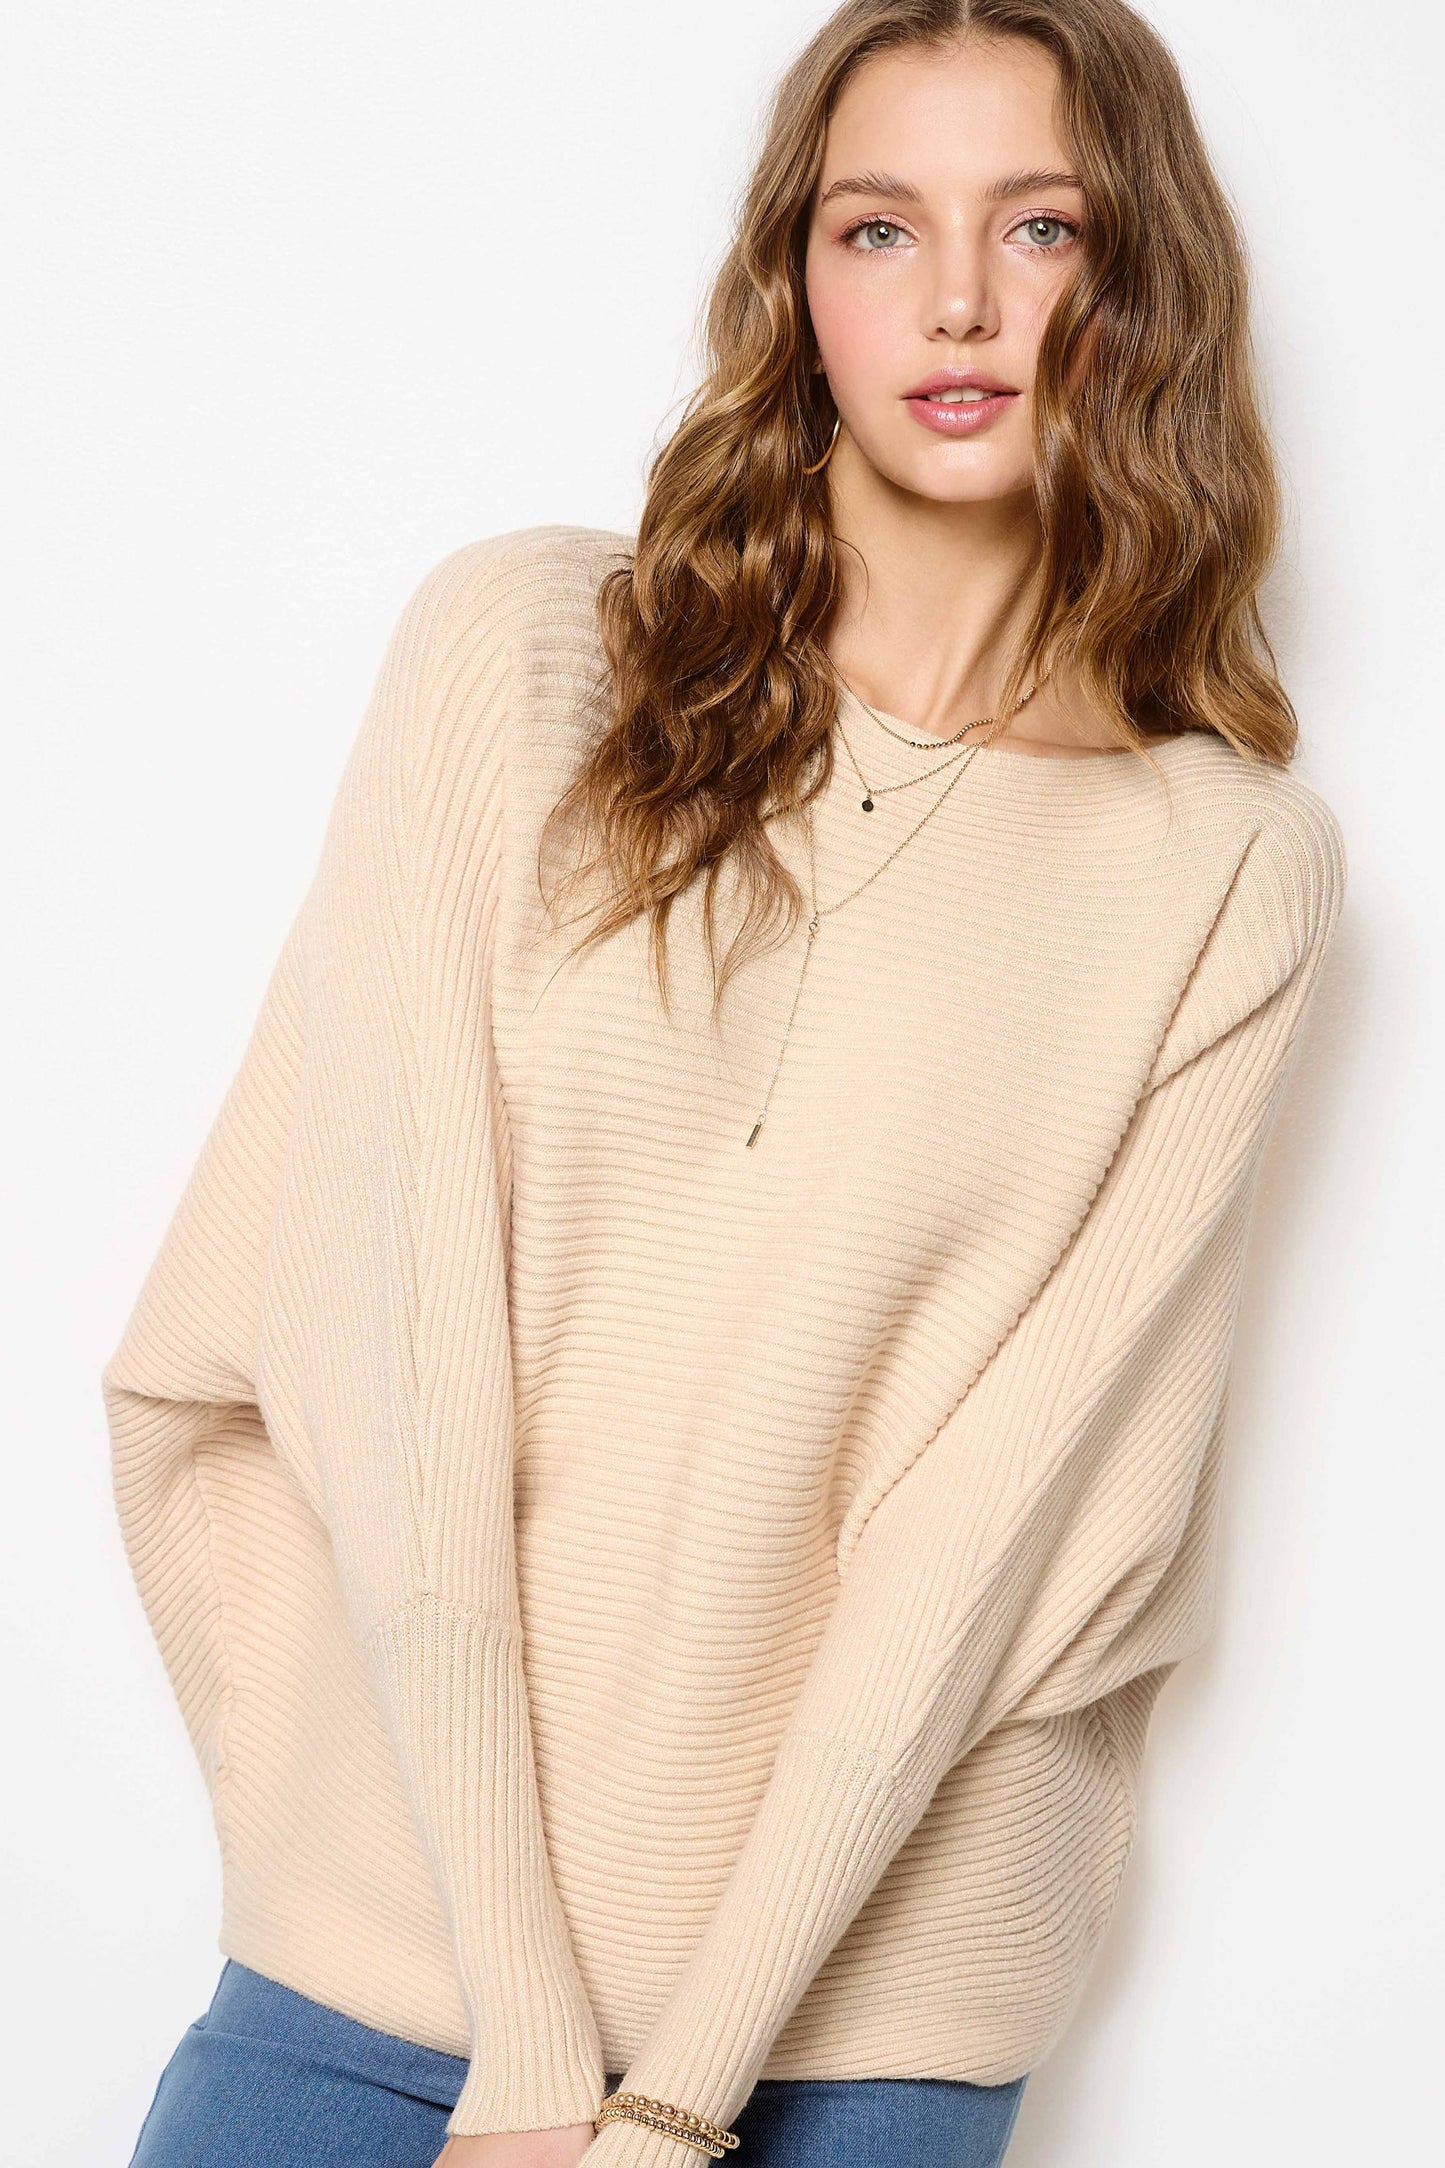 MCS3570-Slouchy Fit Fall Winter Bubble Sleeve Sweater: L / Black